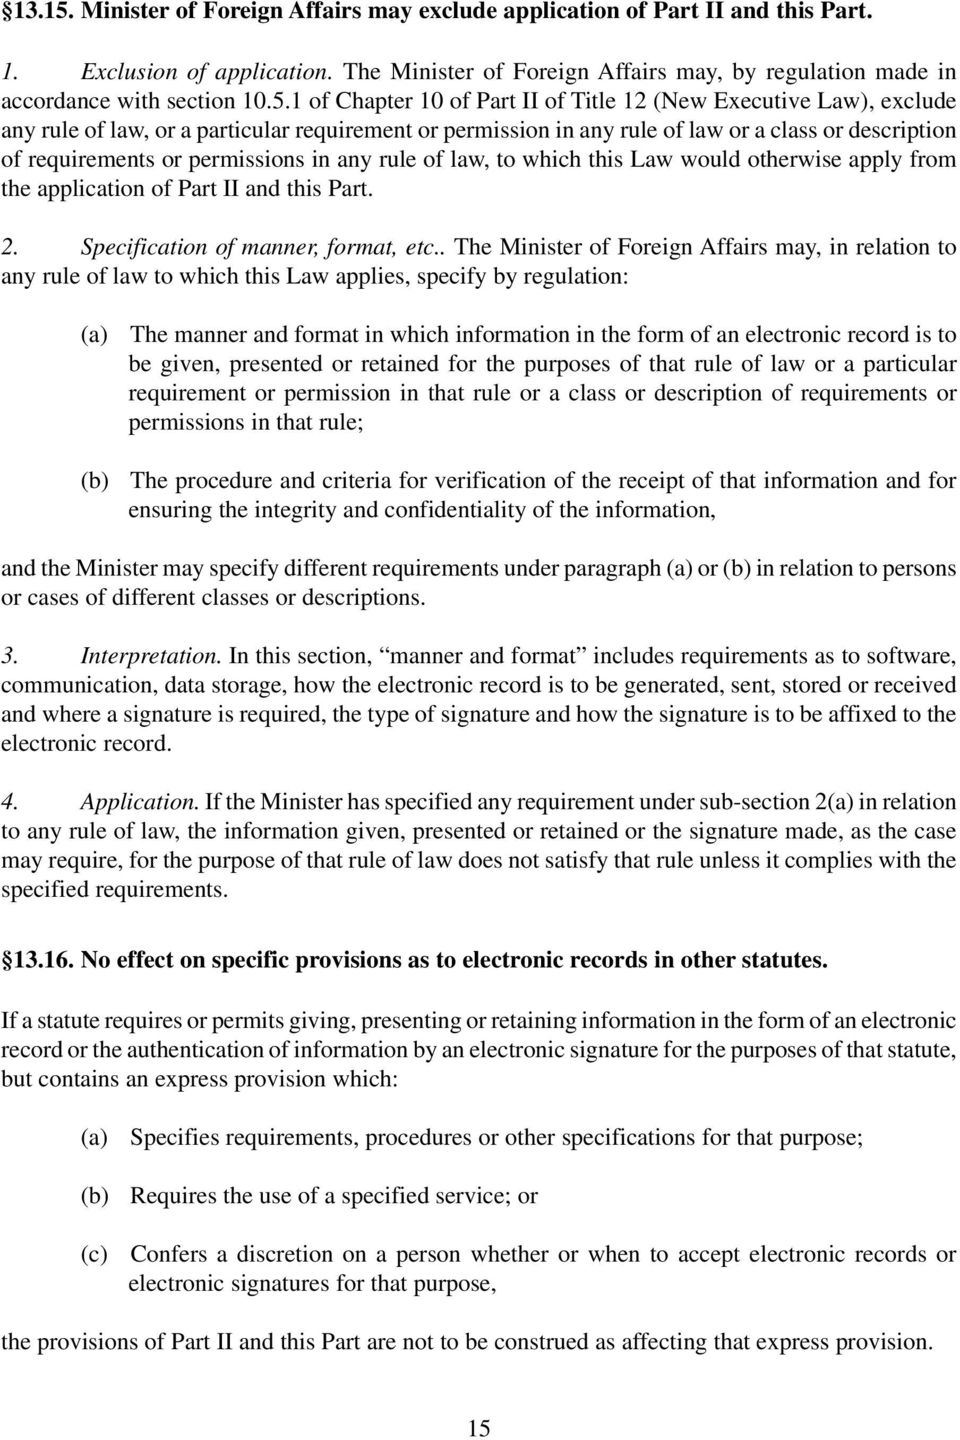 permissions in any rule of law, to which this Law would otherwise apply from the application of Part II and this Part. 2. Specification of manner, format, etc.